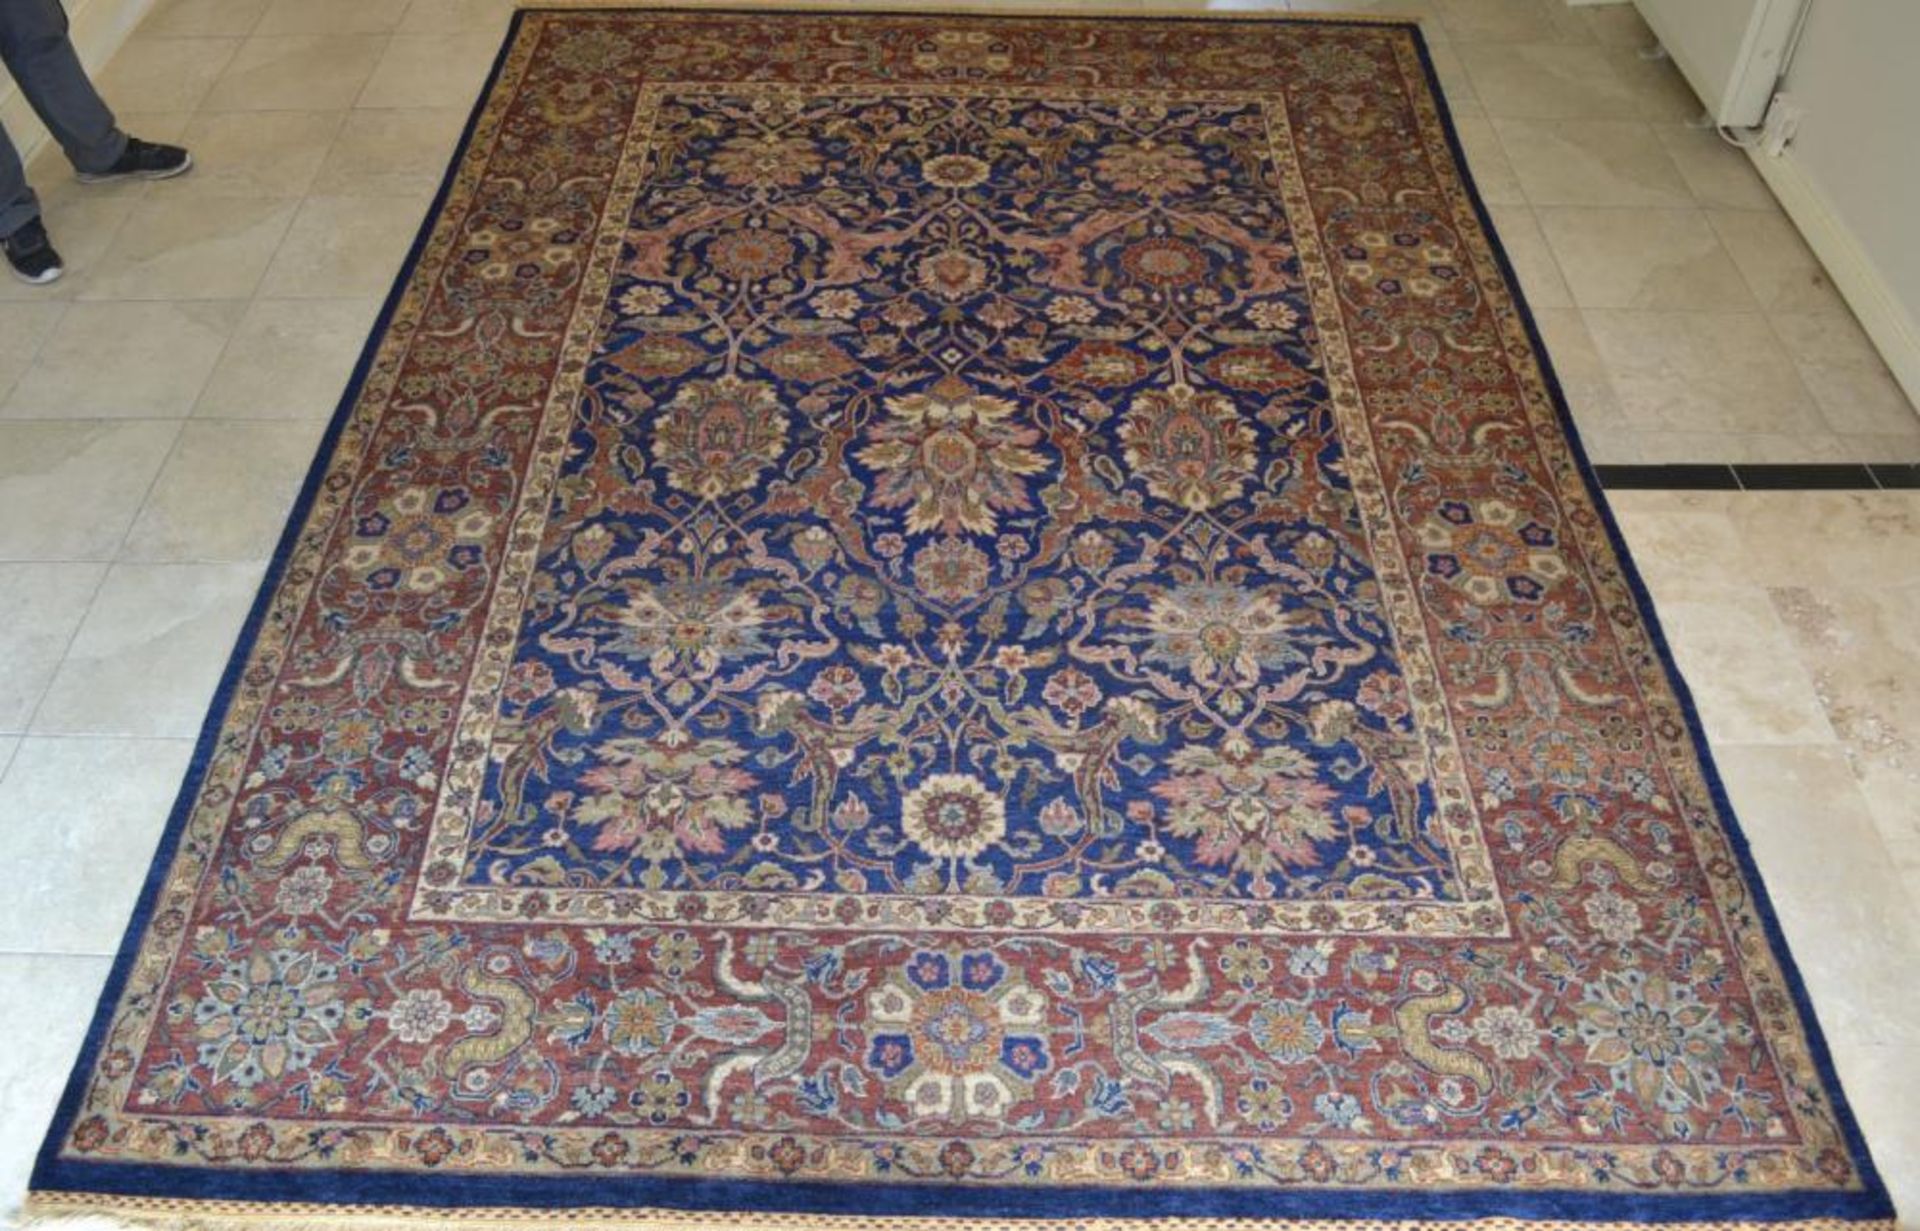 1 x Fine Indian Vegetable Dyed Handmade Carpet in Navy and Rust - All Wool With Cotton Foundation - - Image 21 of 22